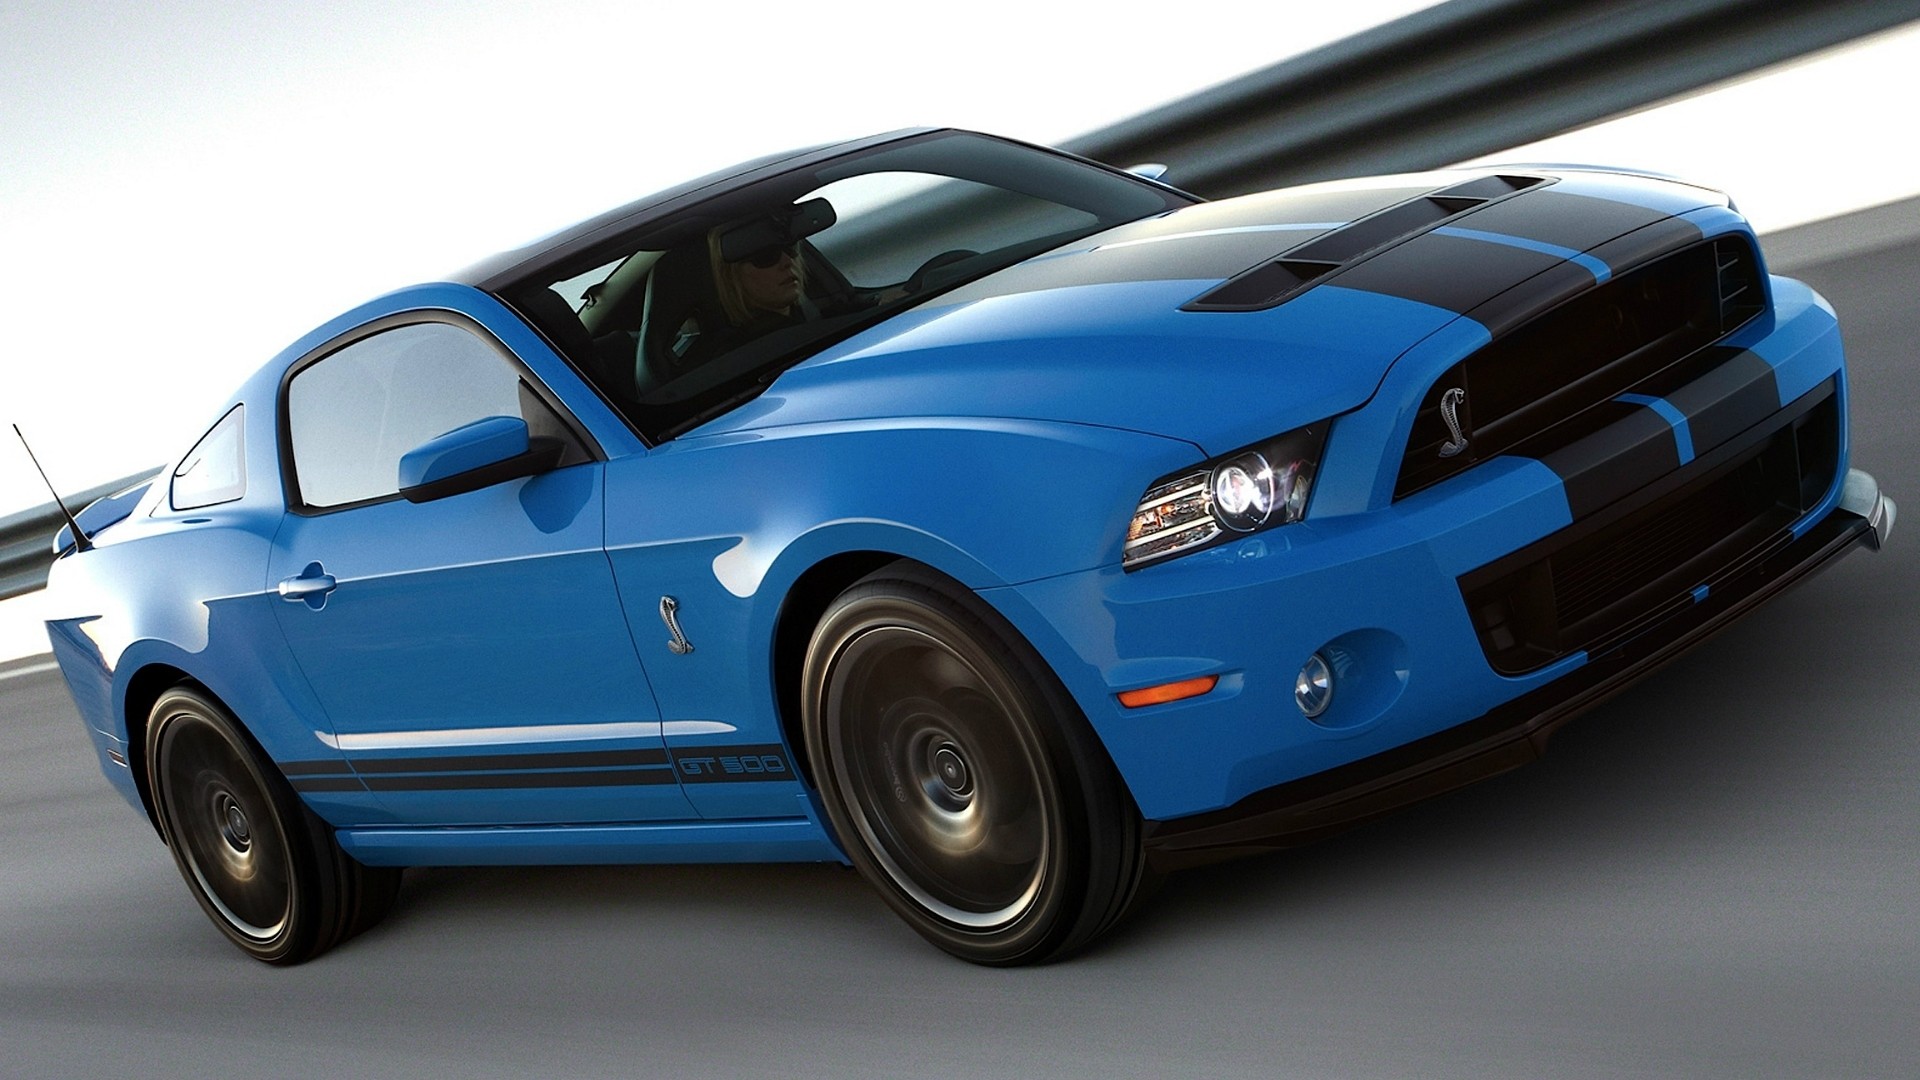  Ford Mustang Shelby GT500 HD Wallpaper 2013 Ford Mustang Shelby GT500 1920x1080